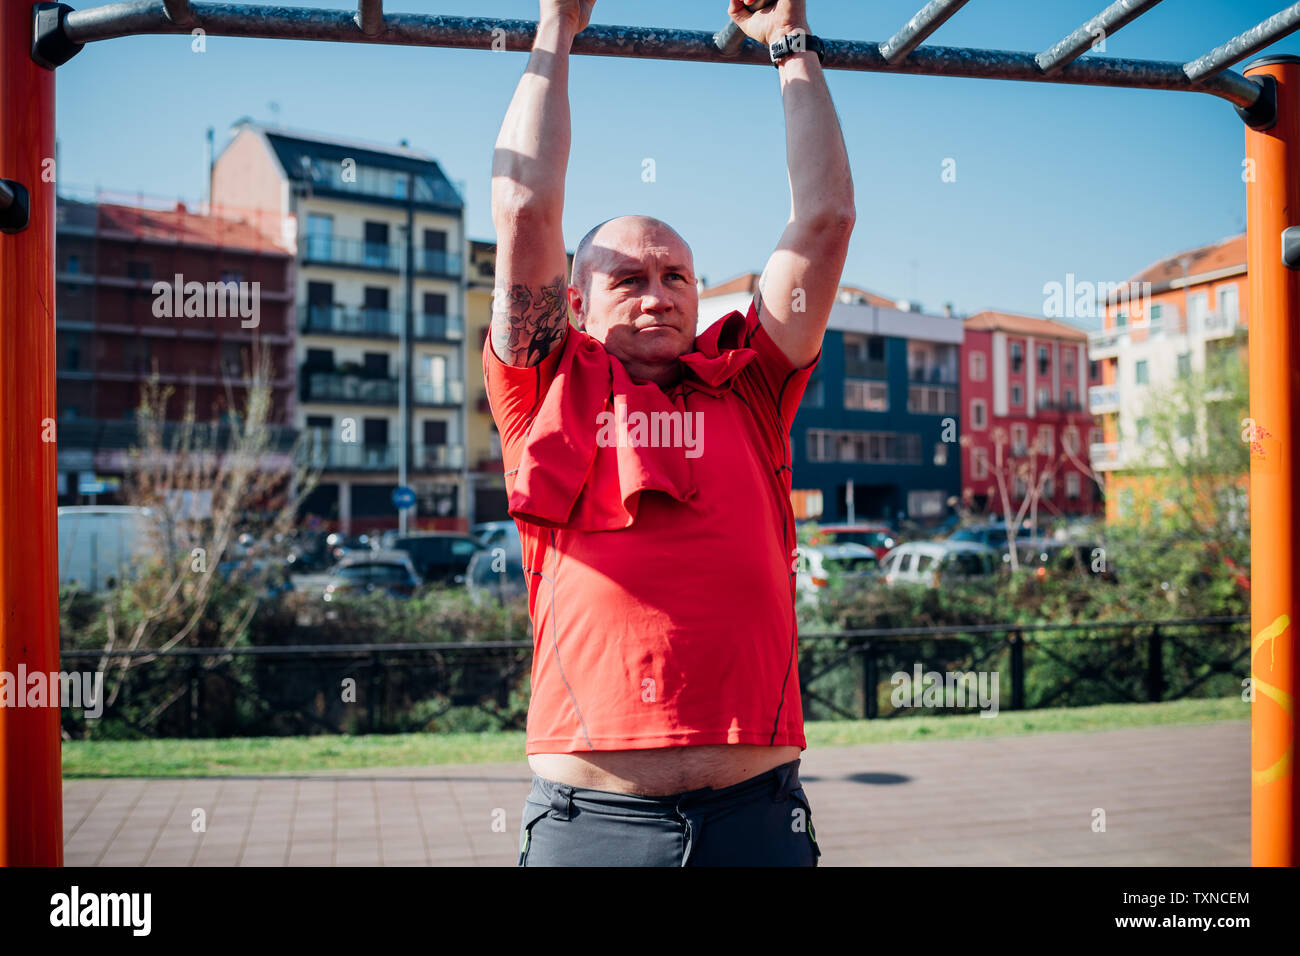 Calisthenics at outdoor gym, mature man doing pull up on exercise equipment Stock Photo